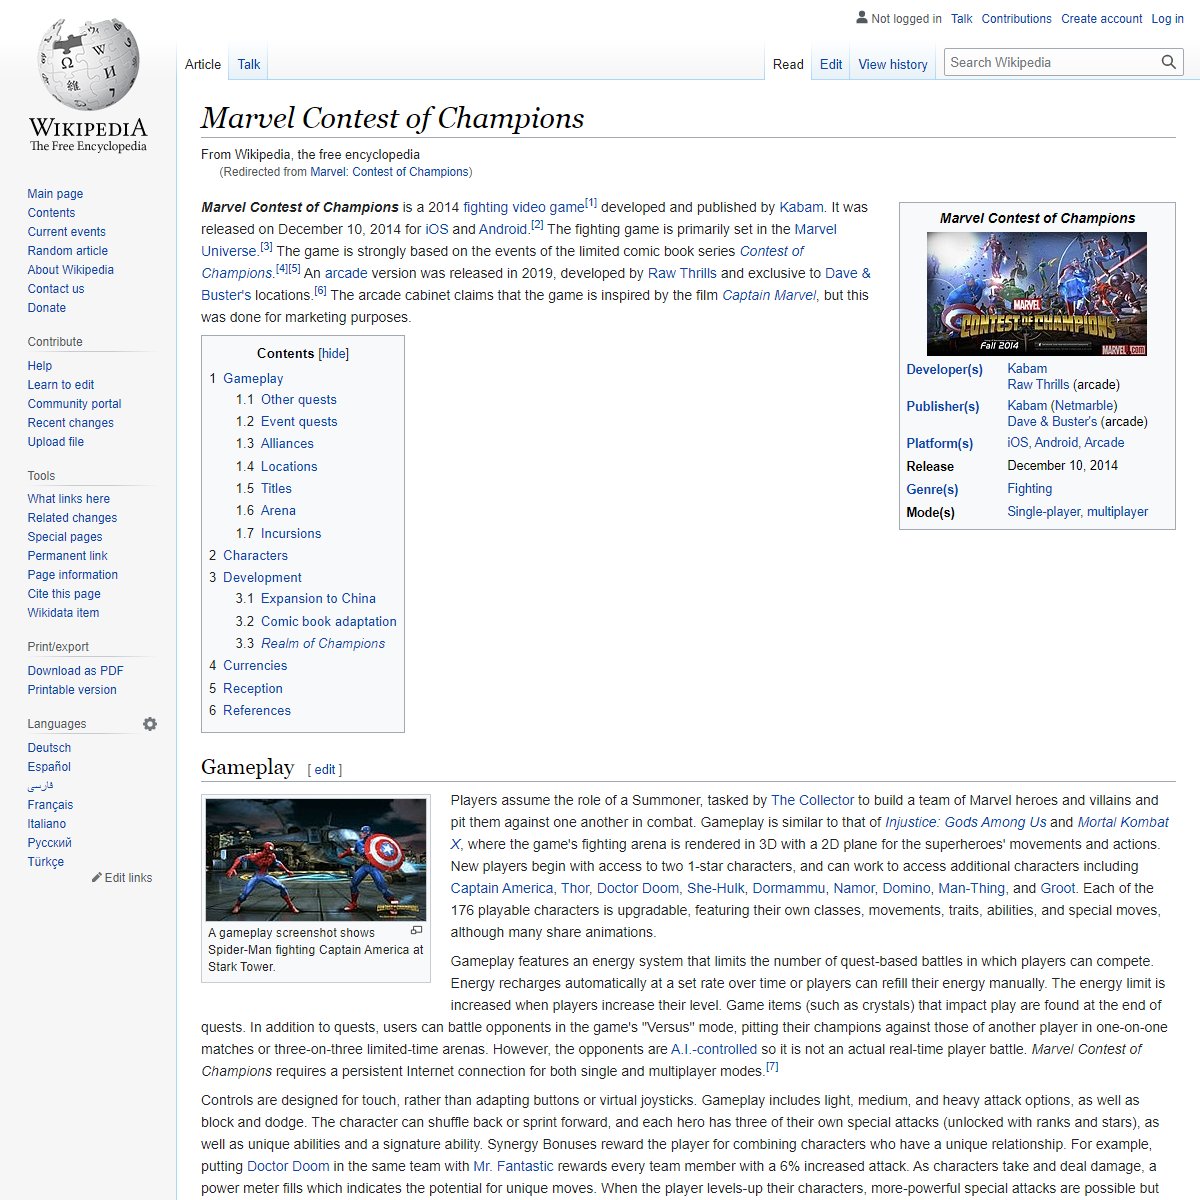 A complete backup of https://en.wikipedia.org/wiki/Marvel:_Contest_of_Champions